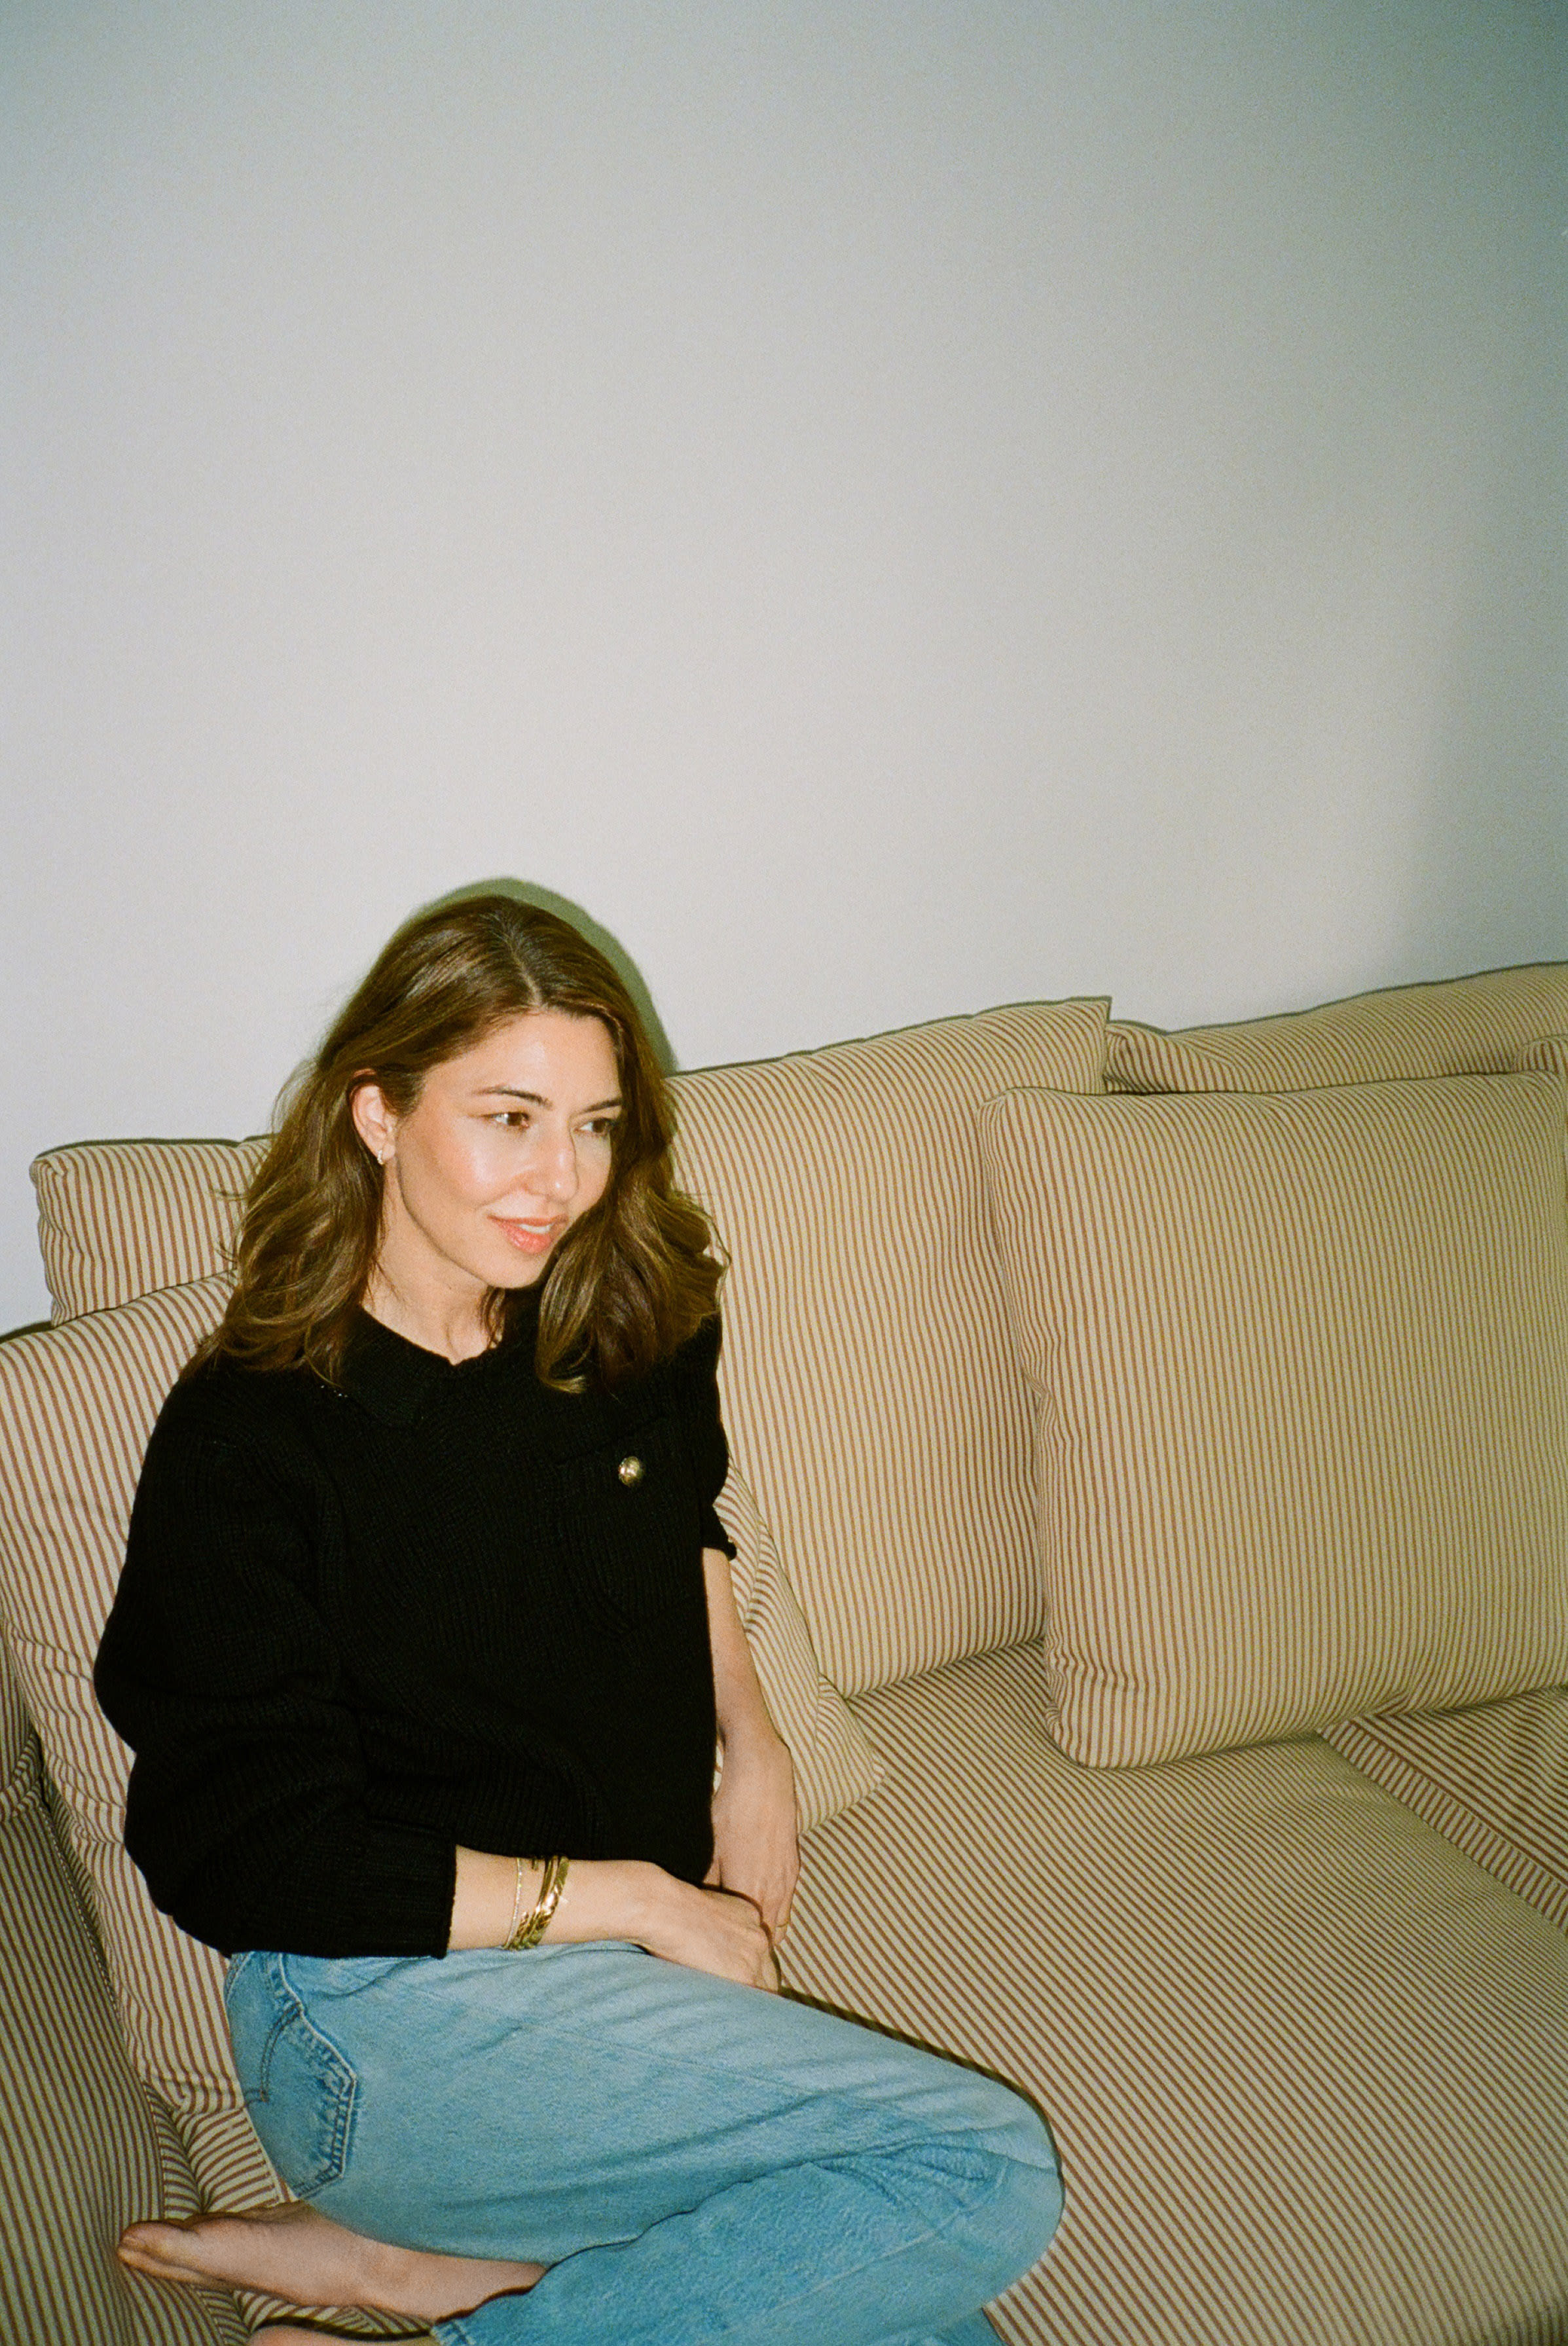 Sofia Coppola is collaborating with knitwear brand Barrie